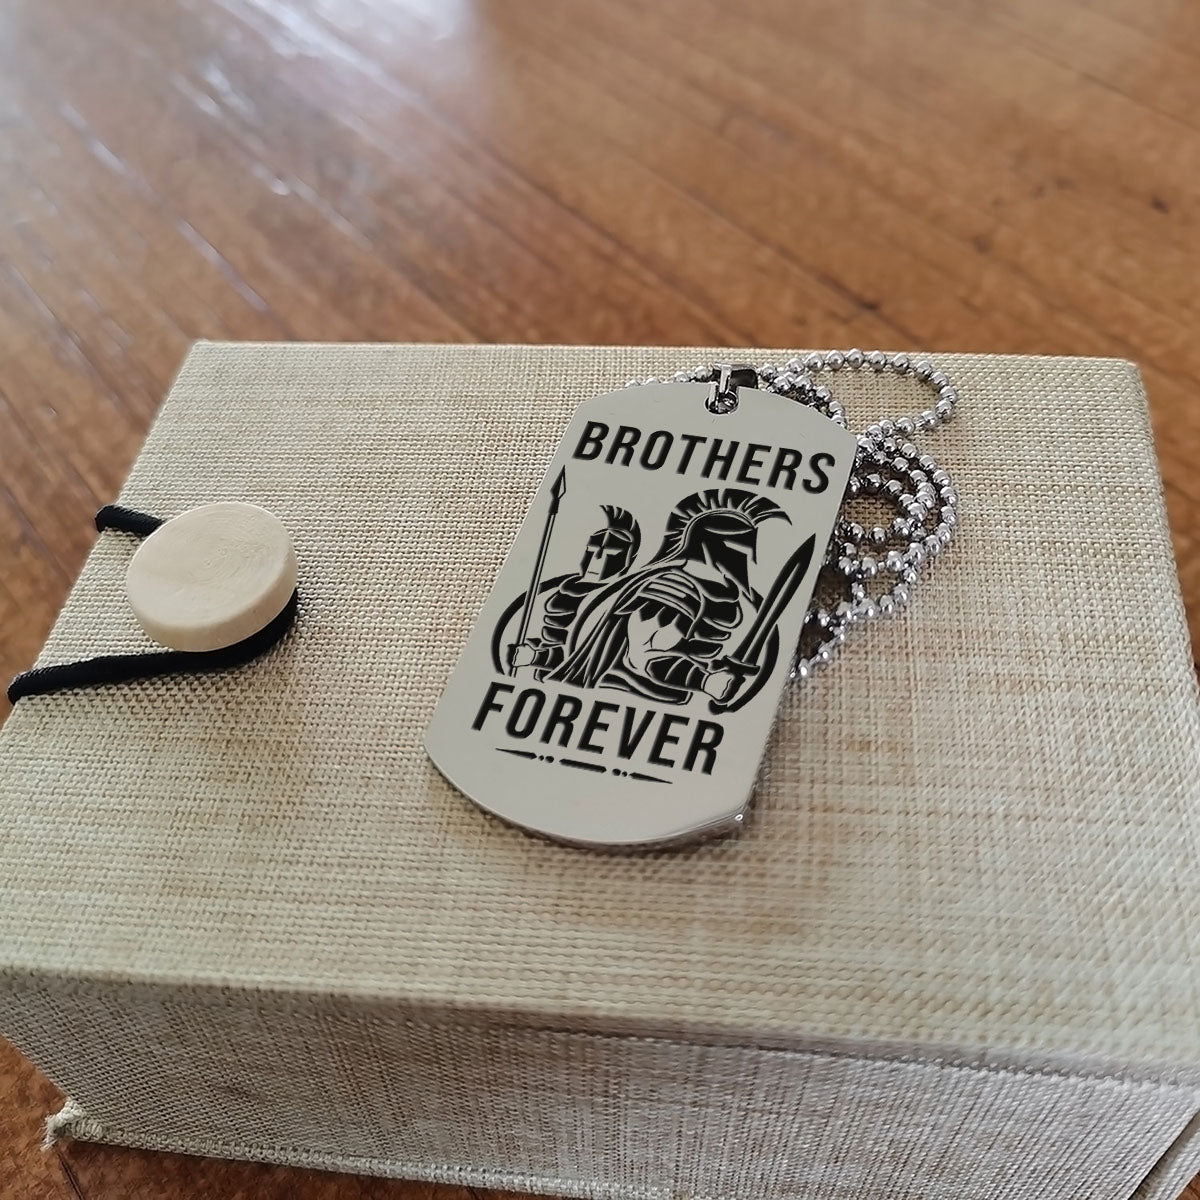 WAD054 - Brothers Forever - Call On Me Brother - Warrior - Spartan Necklace - Engrave Silver Dog Tag